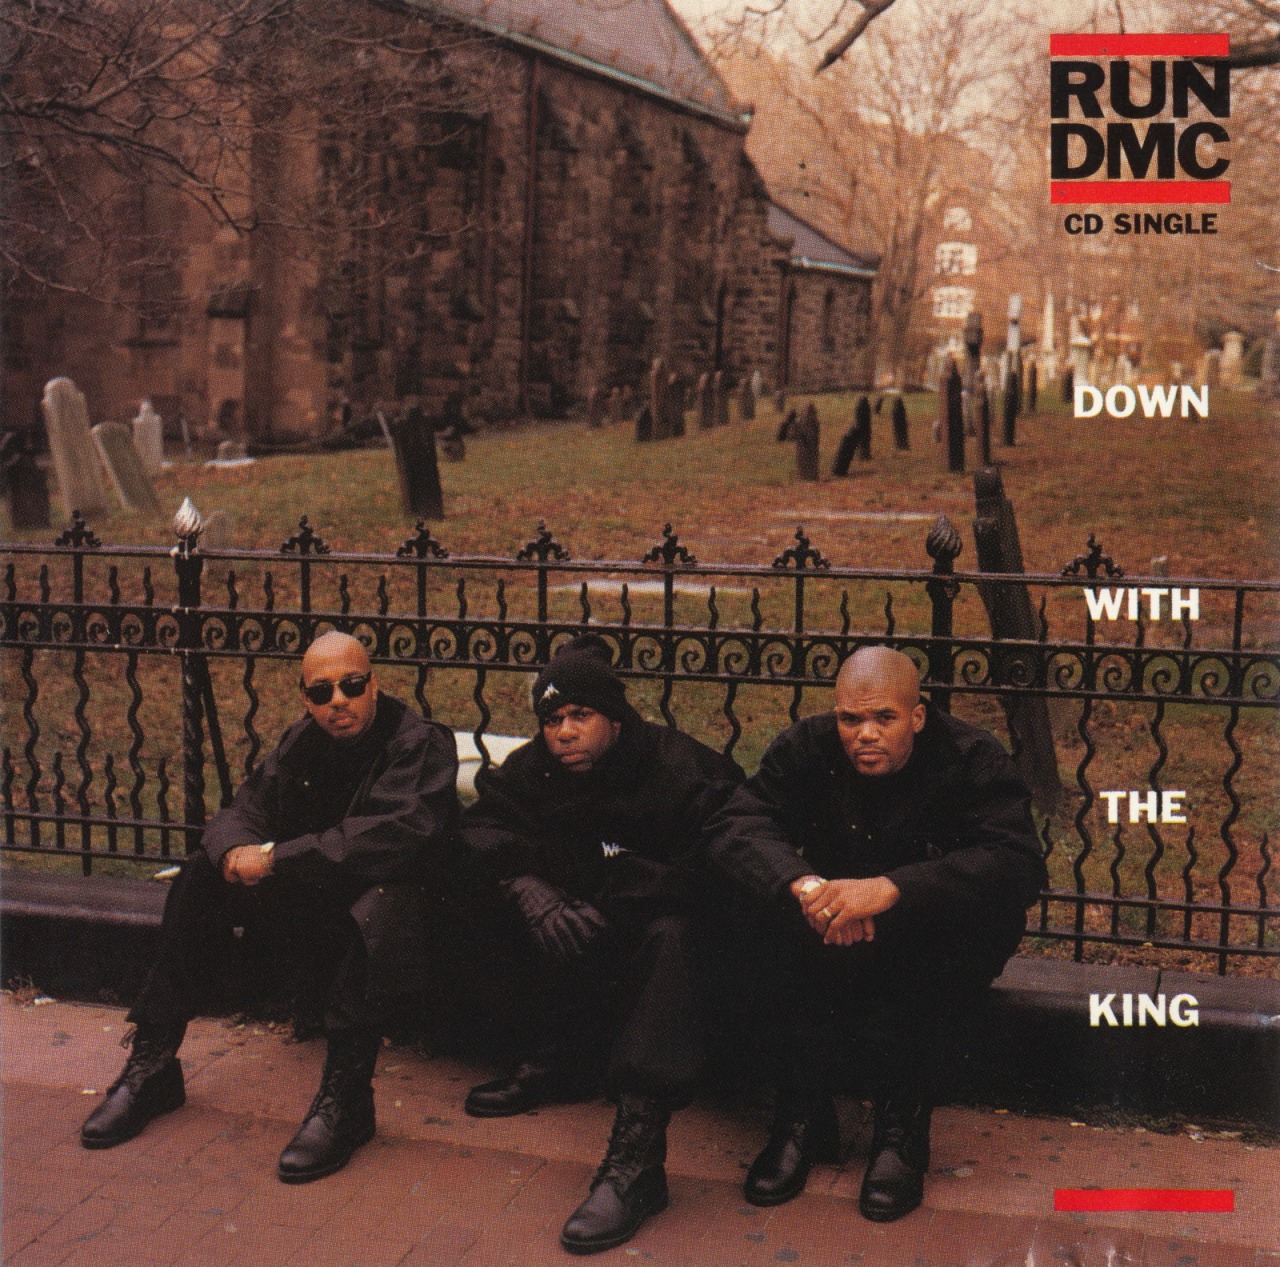 20 YEARS AGO TODAY |3/2/93| Run-DMC released the first single, Down With The King,